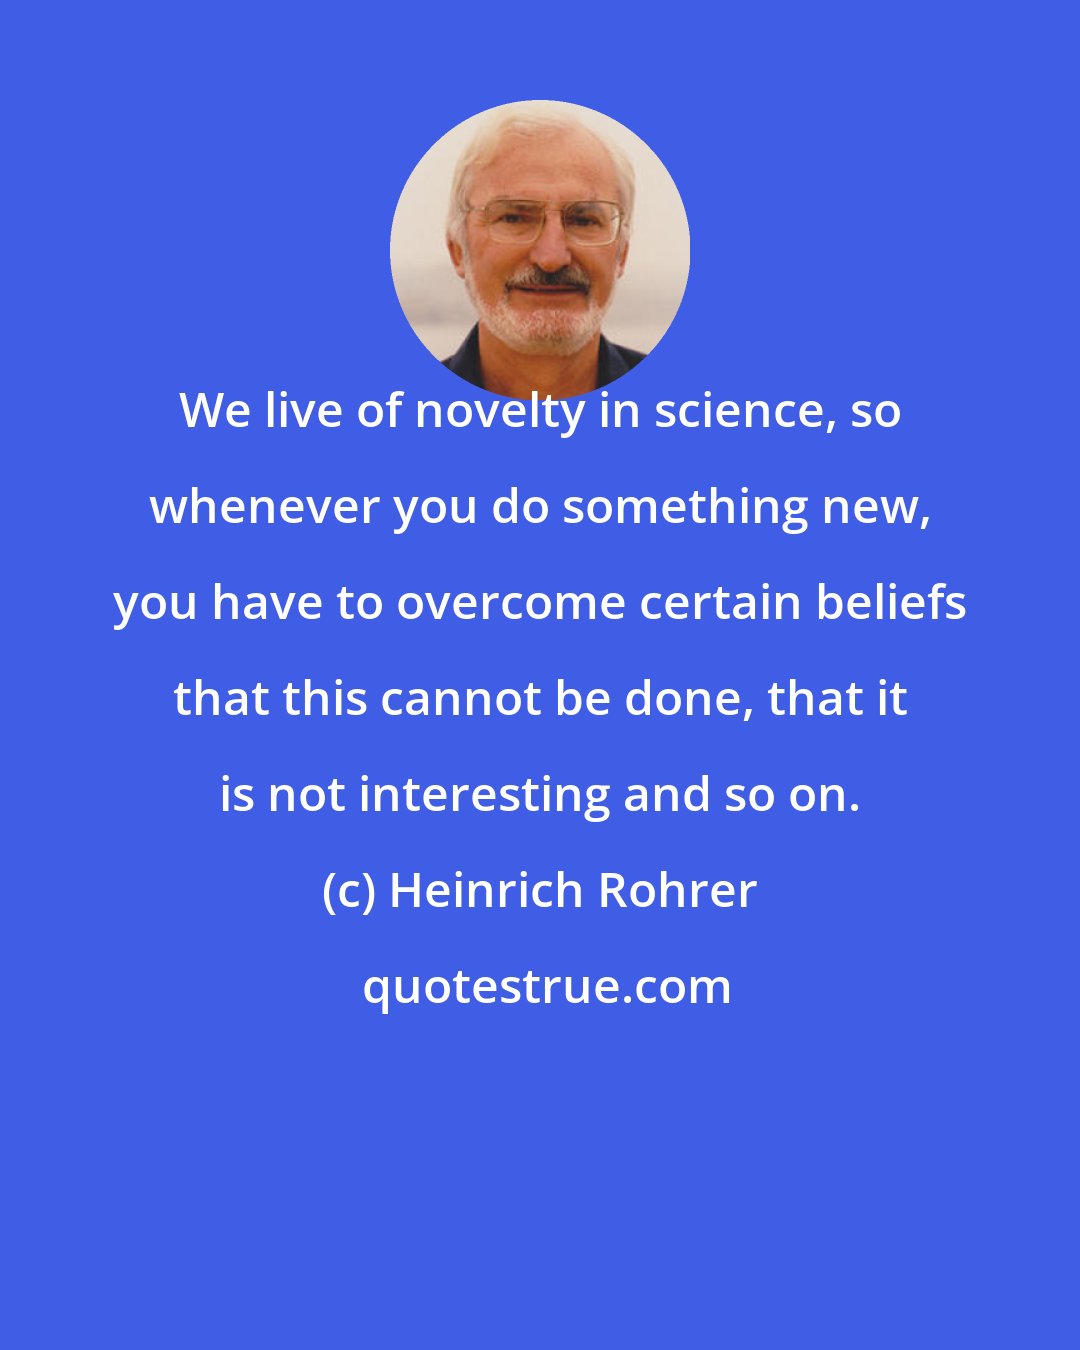 Heinrich Rohrer: We live of novelty in science, so whenever you do something new, you have to overcome certain beliefs that this cannot be done, that it is not interesting and so on.